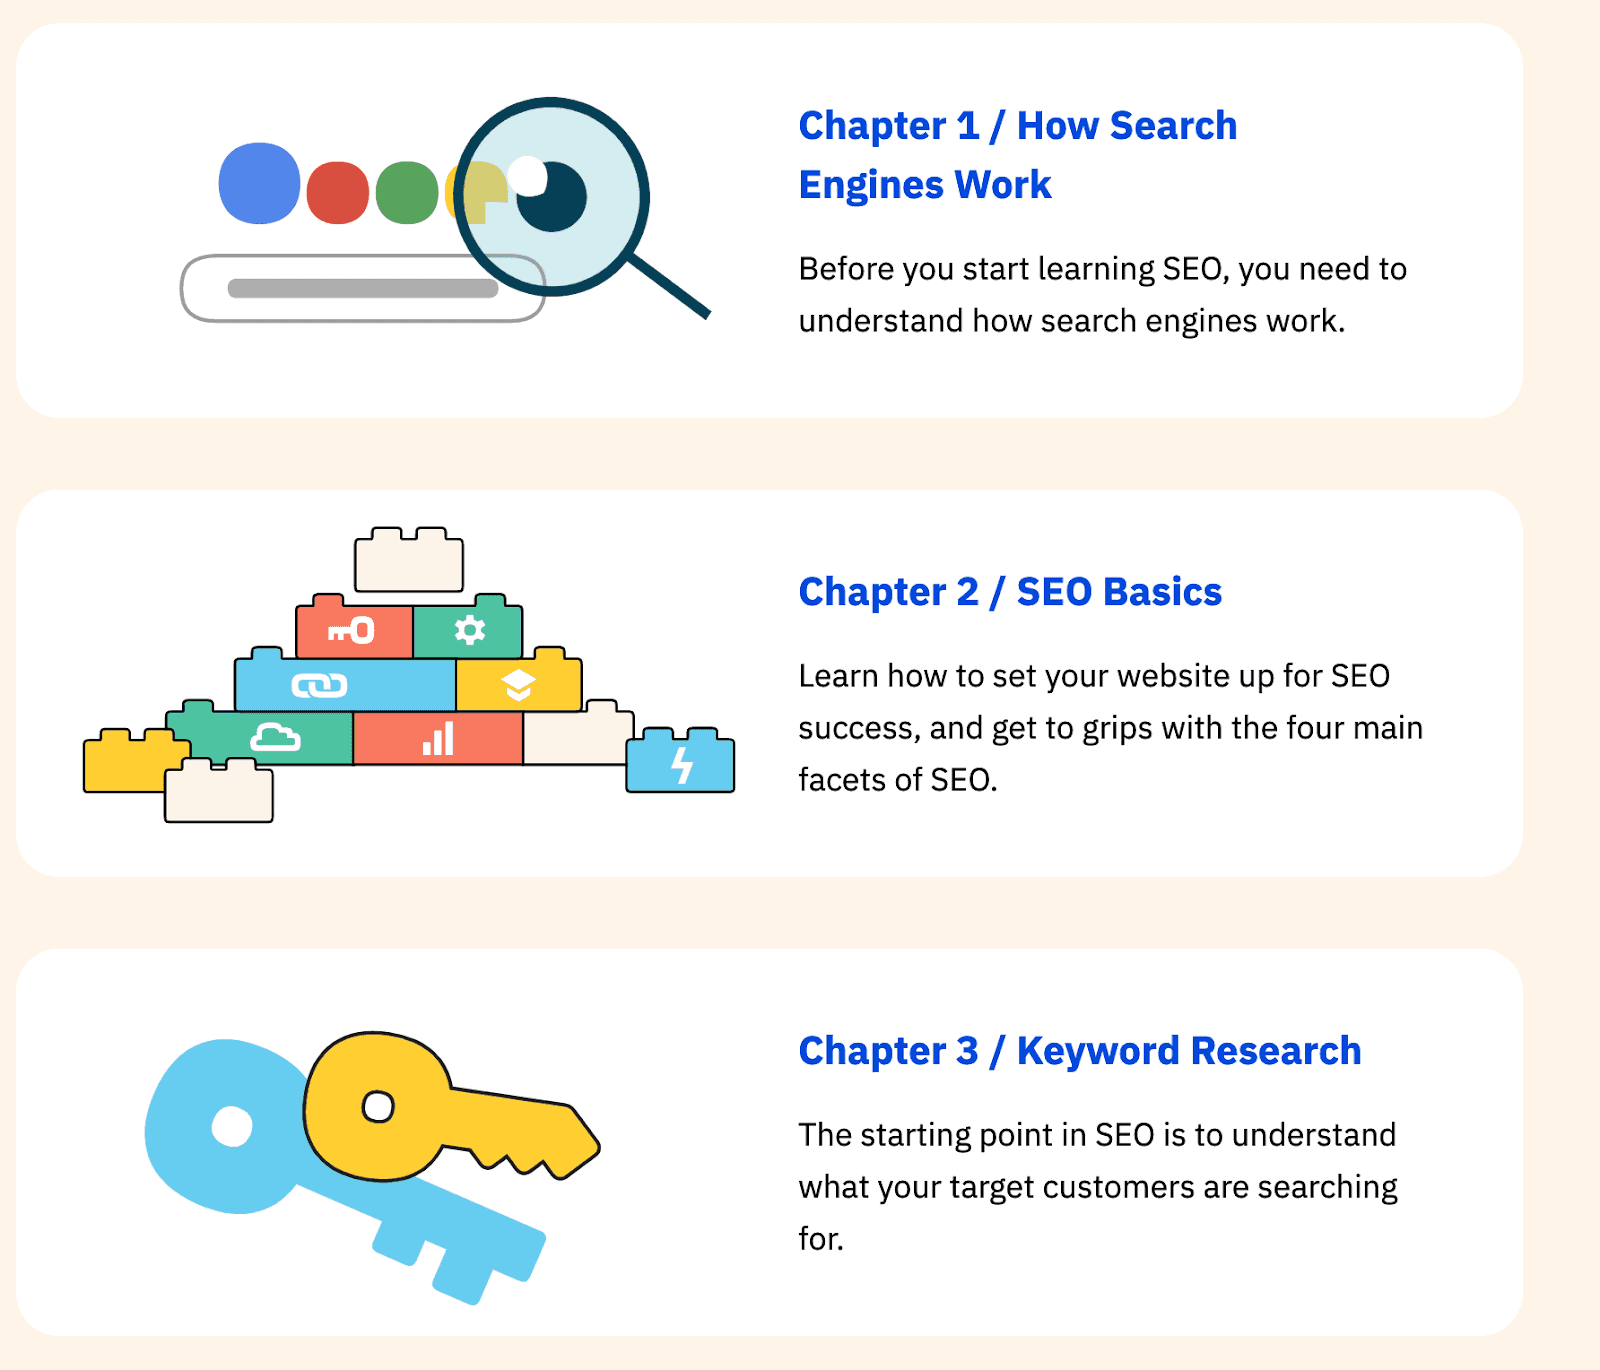 SEO explained in 3 parts, SEO basics, search engines, and key words